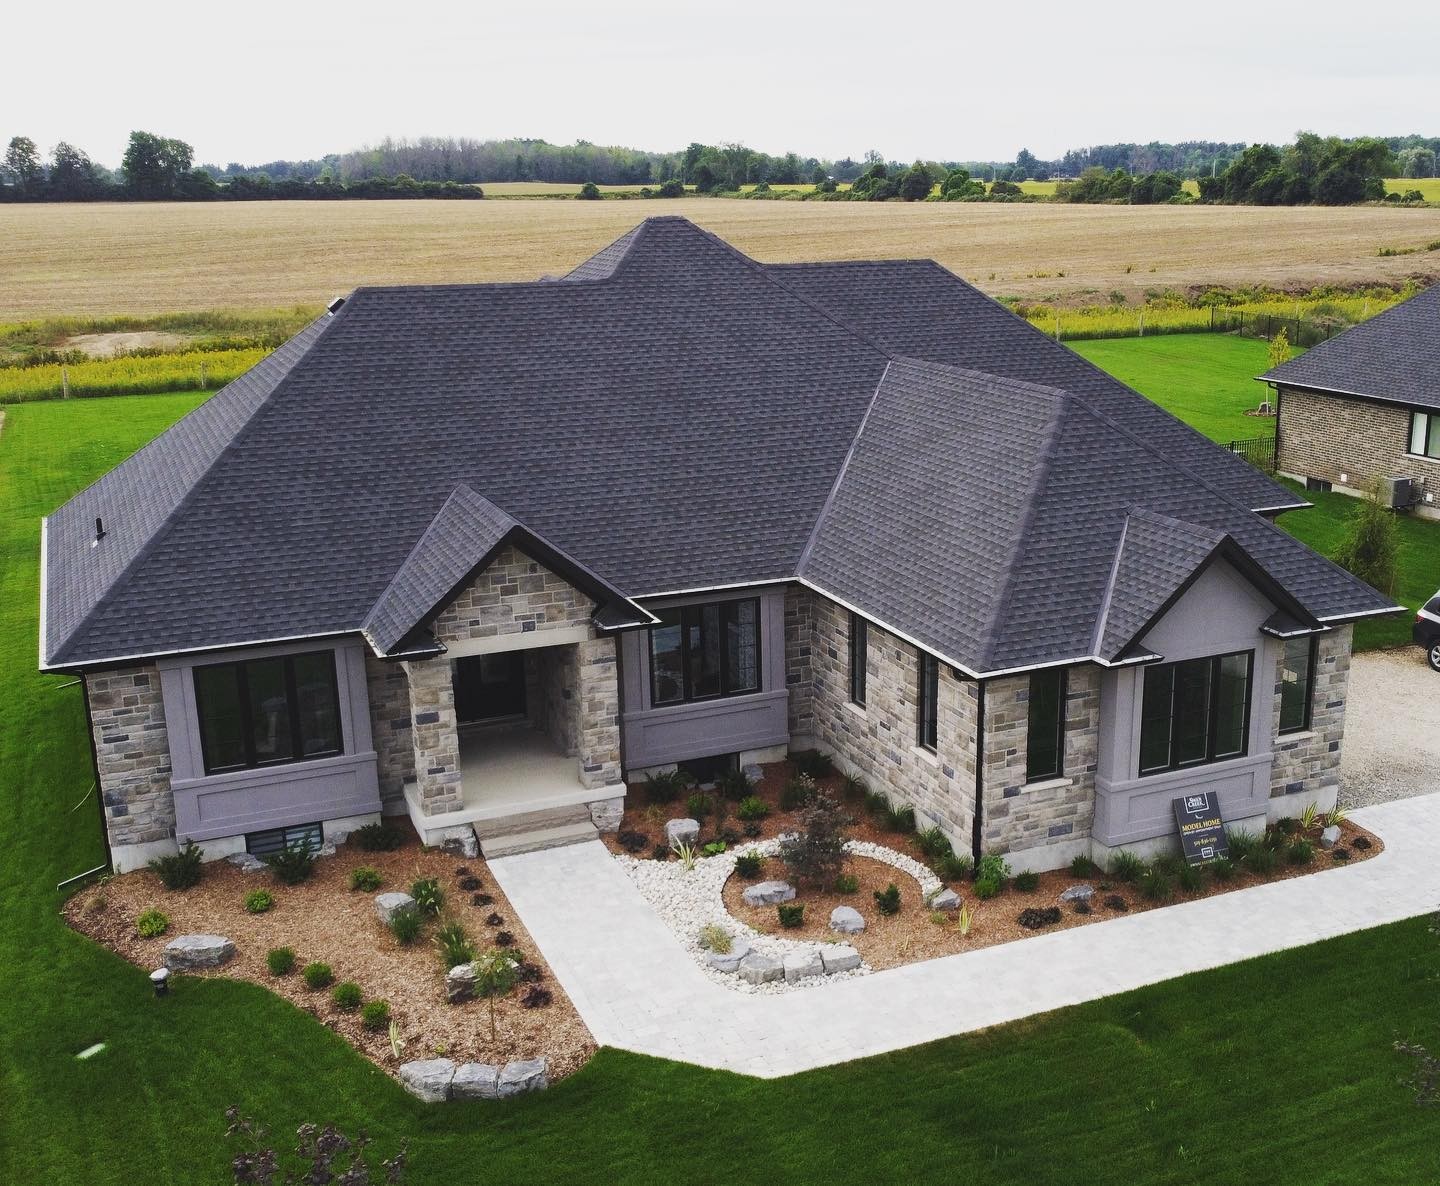 Spring is just around the corner! ☀️😎 Looking forward to another solid roofing season ahead. 
.
.
.
#customhomes #qualityroofing #guelphbusiness #slopedroofing #flatroofing #gafmasterelite #roofingcontractor #newbuild #reroofing